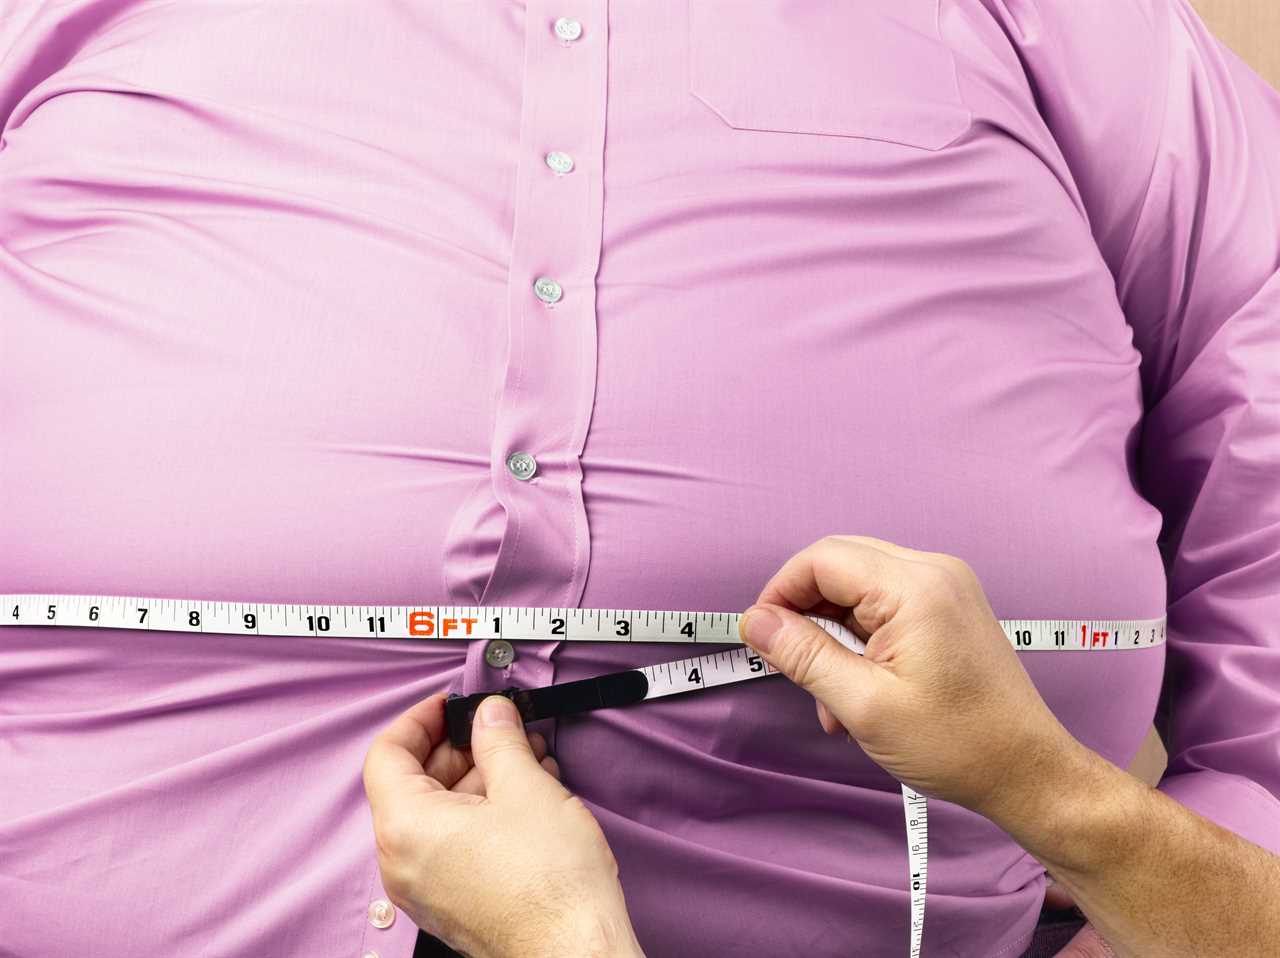 Obesity Linked to 32 Types of Cancer, Experts Warn